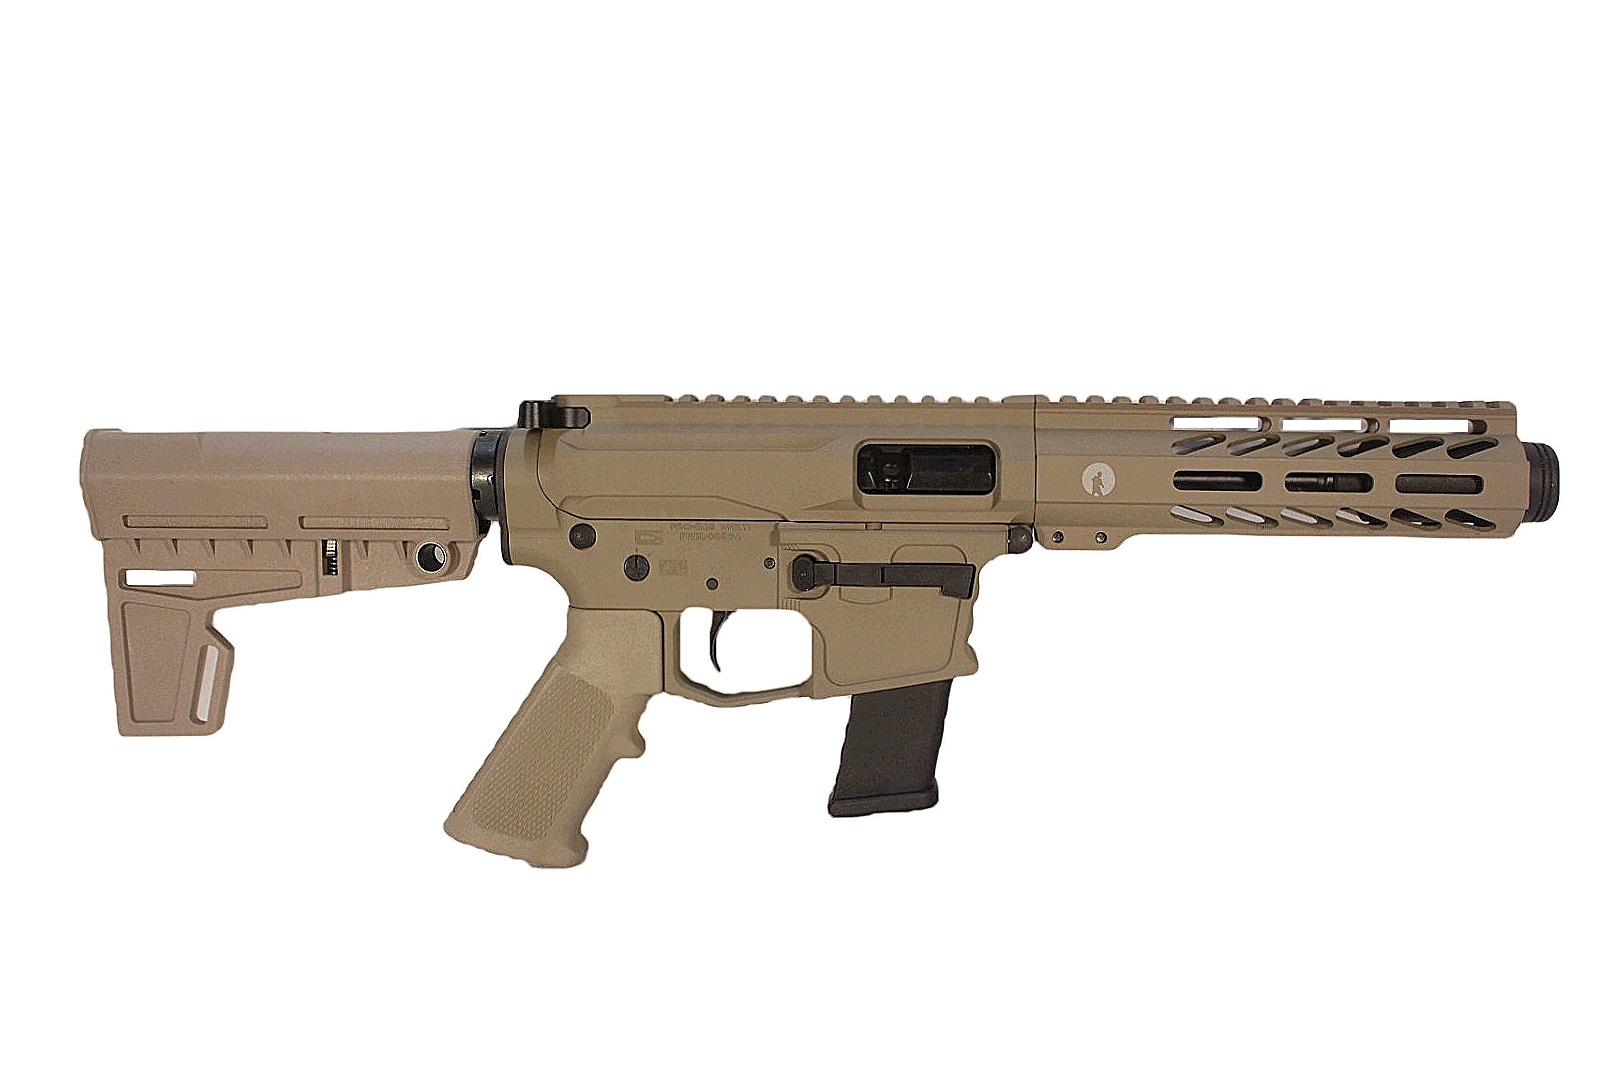 5 inch 9 9mm AR-15 Pistol | Magpul FDE Color | Made in the USA